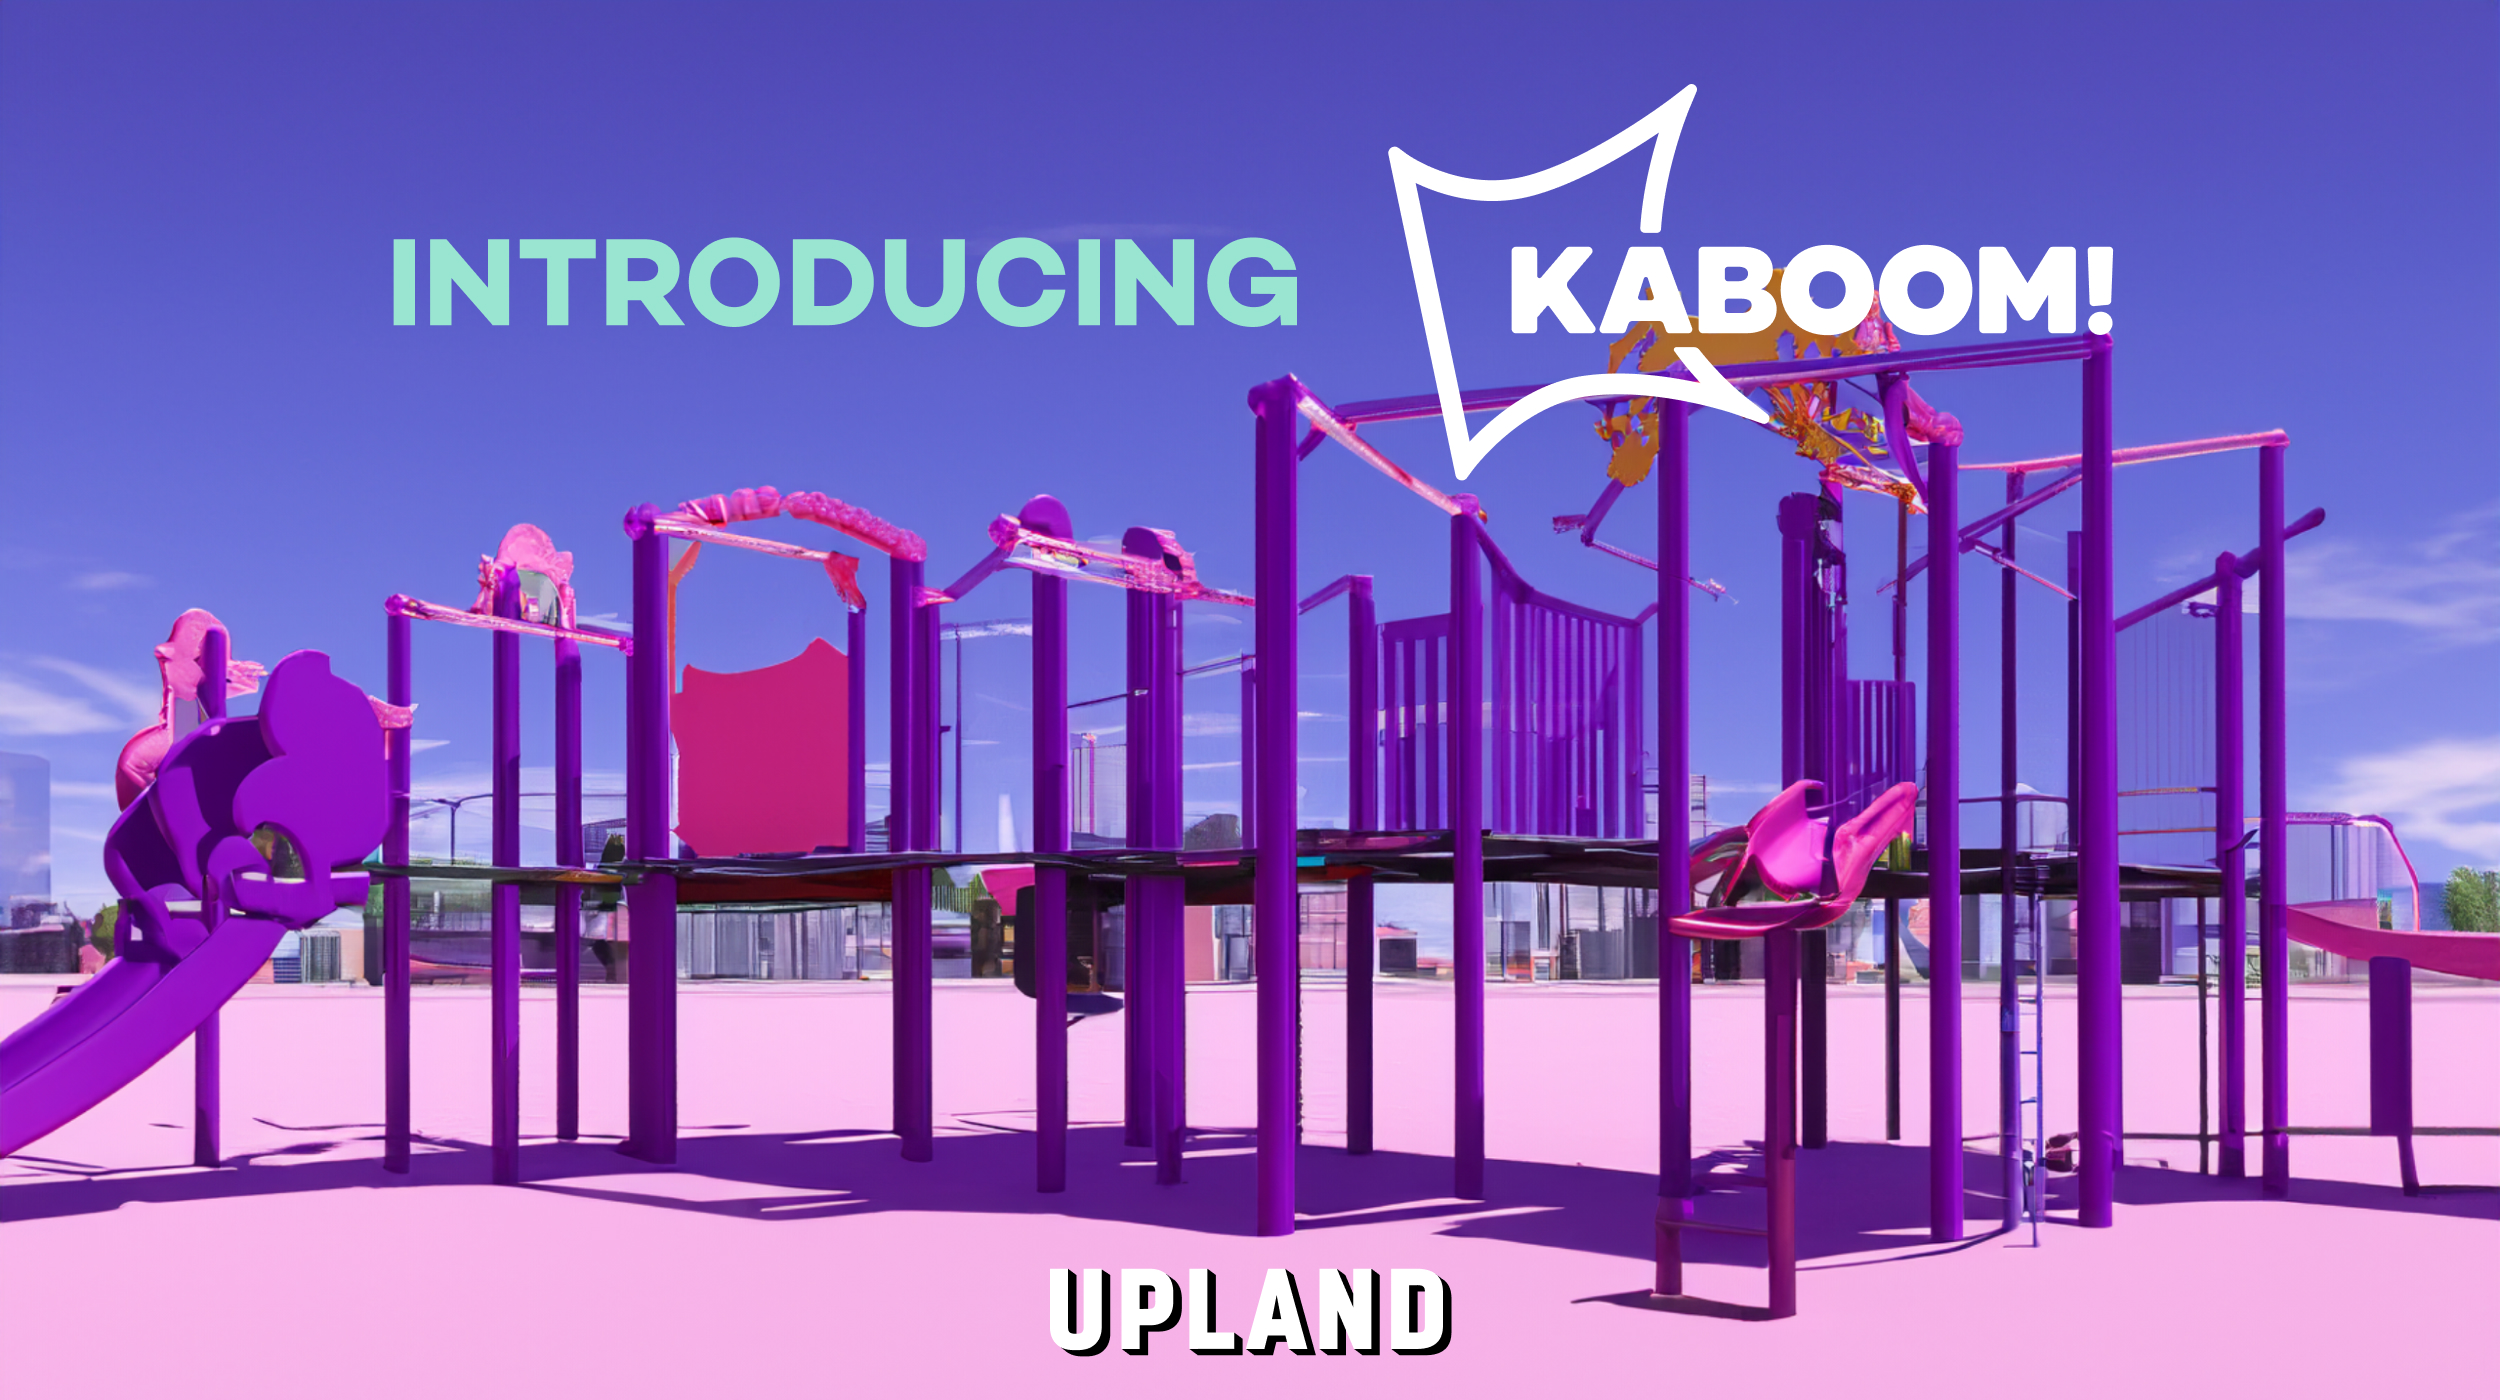 Upland And KABOOM! Partner To Resolve Playspace Inequity